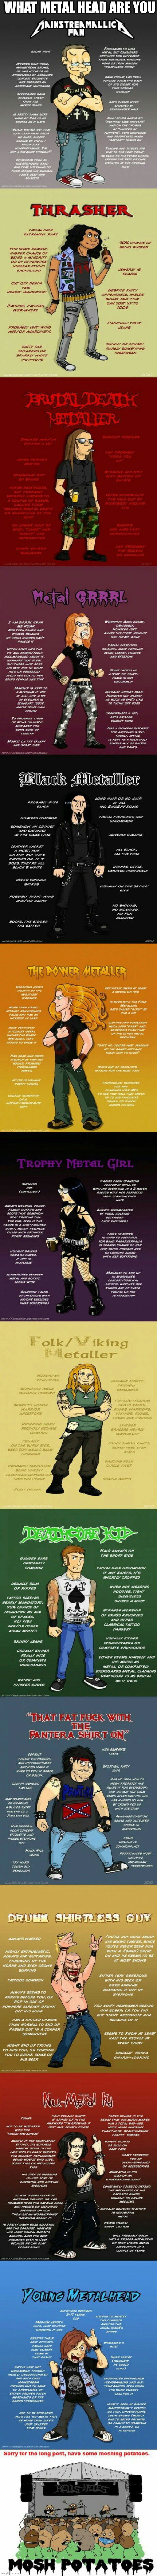 WHAT METAL HEAD ARE YOU | image tagged in scumbag steve | made w/ Imgflip meme maker